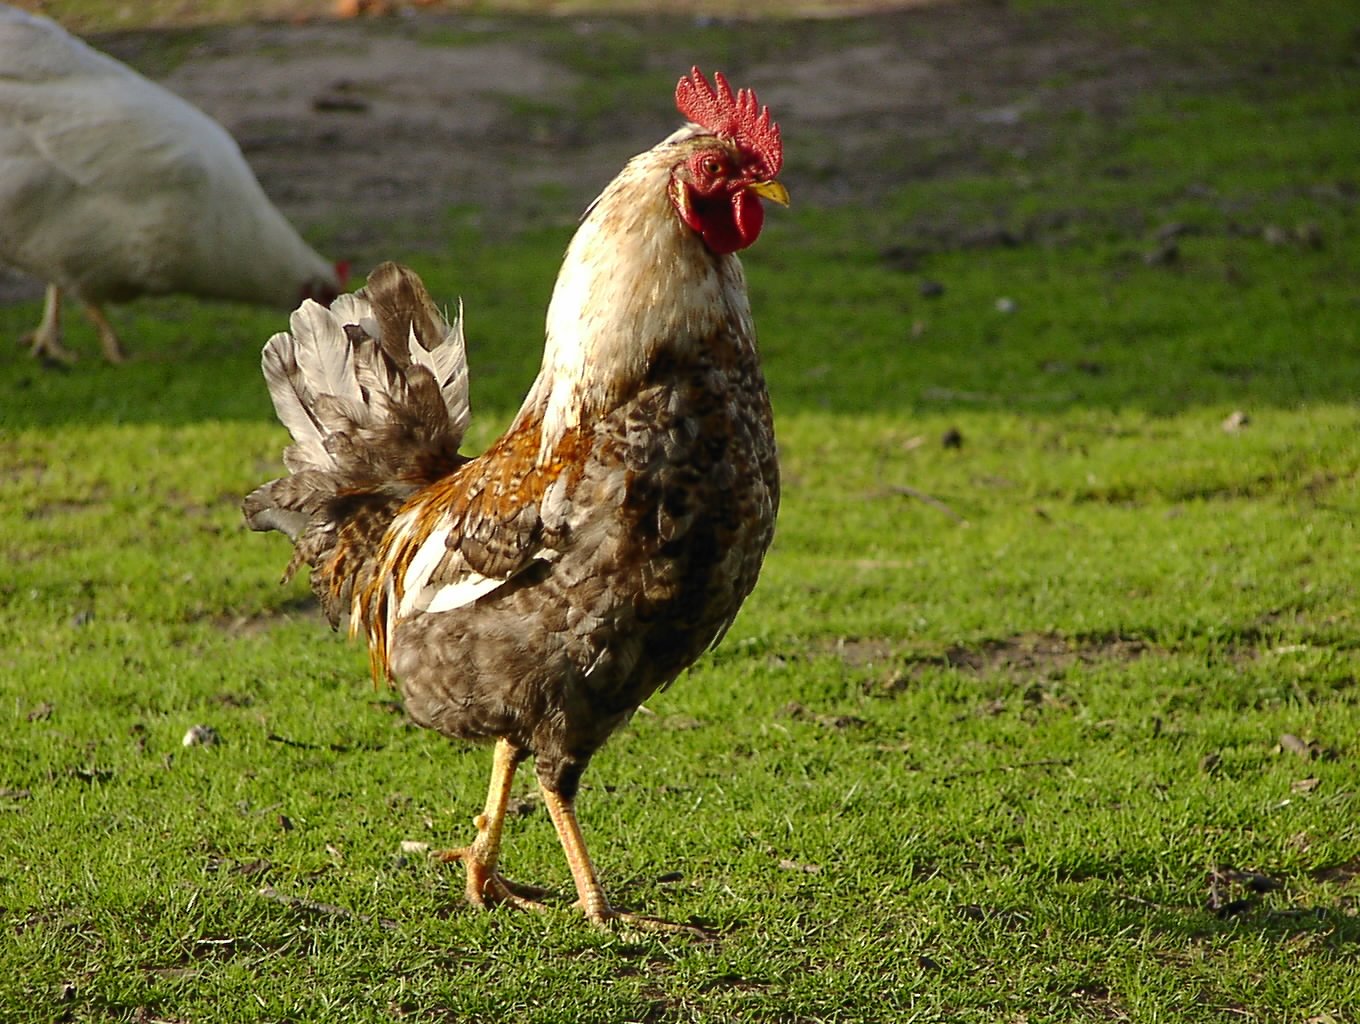 a group of chickens in an open grassy field